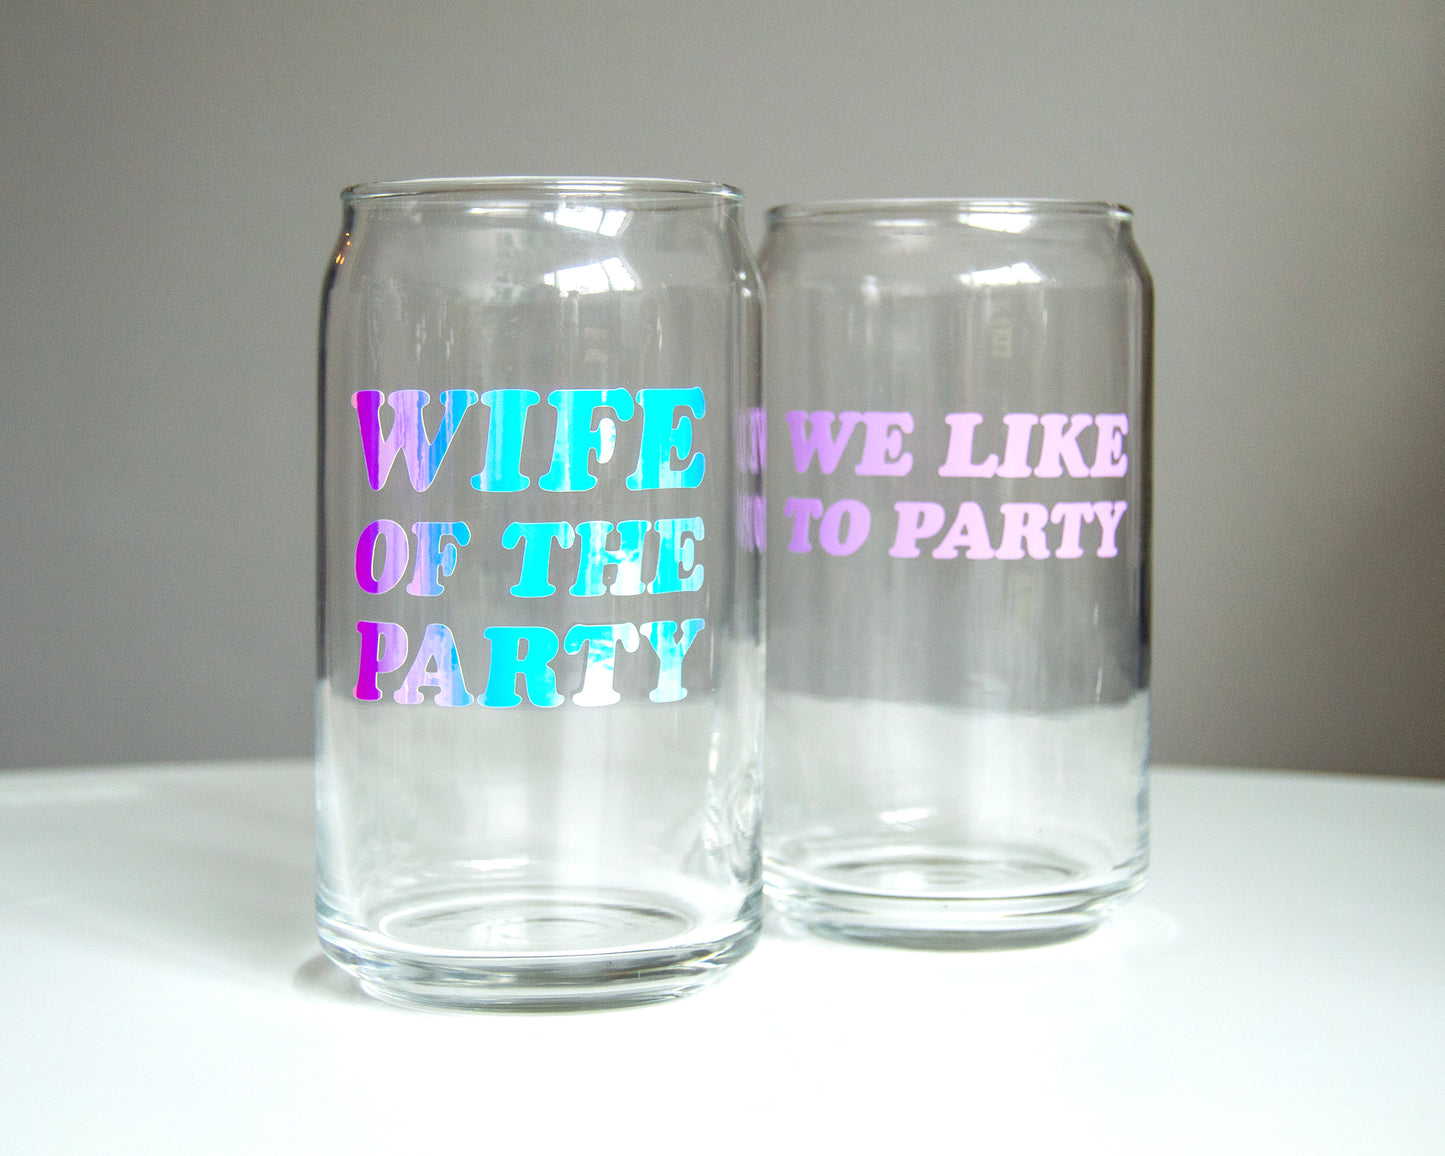 Wife of The Party + We Like To Party Glass Can Cups